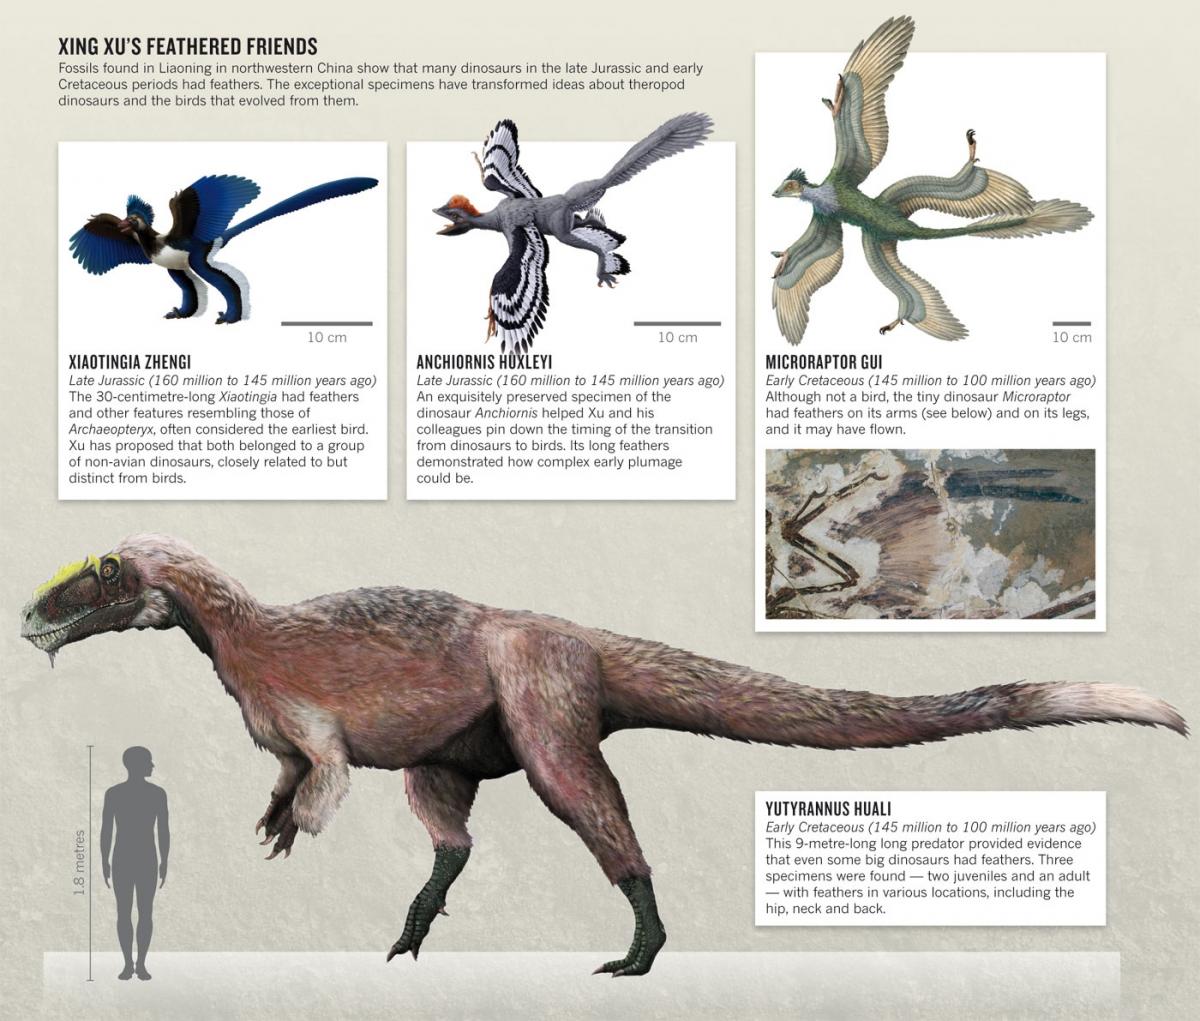 Xing Xu's feathered dinosaur discoveries in China, including Yutyrannus Huali, a large predator (three specimens: one adult 9m long and two juveniles with feathers on neck, hips, and back. X. ZHENGI: XING LIDA/LIU YI; A. HUXLEYI: J. T. CSOTONYI/SPL; M. GUI RECONSTRUCTION: P. SLOAN; M. GUI PHOTOGRAPH: REF. 3; Y. HUALI: BRIAN CHOO